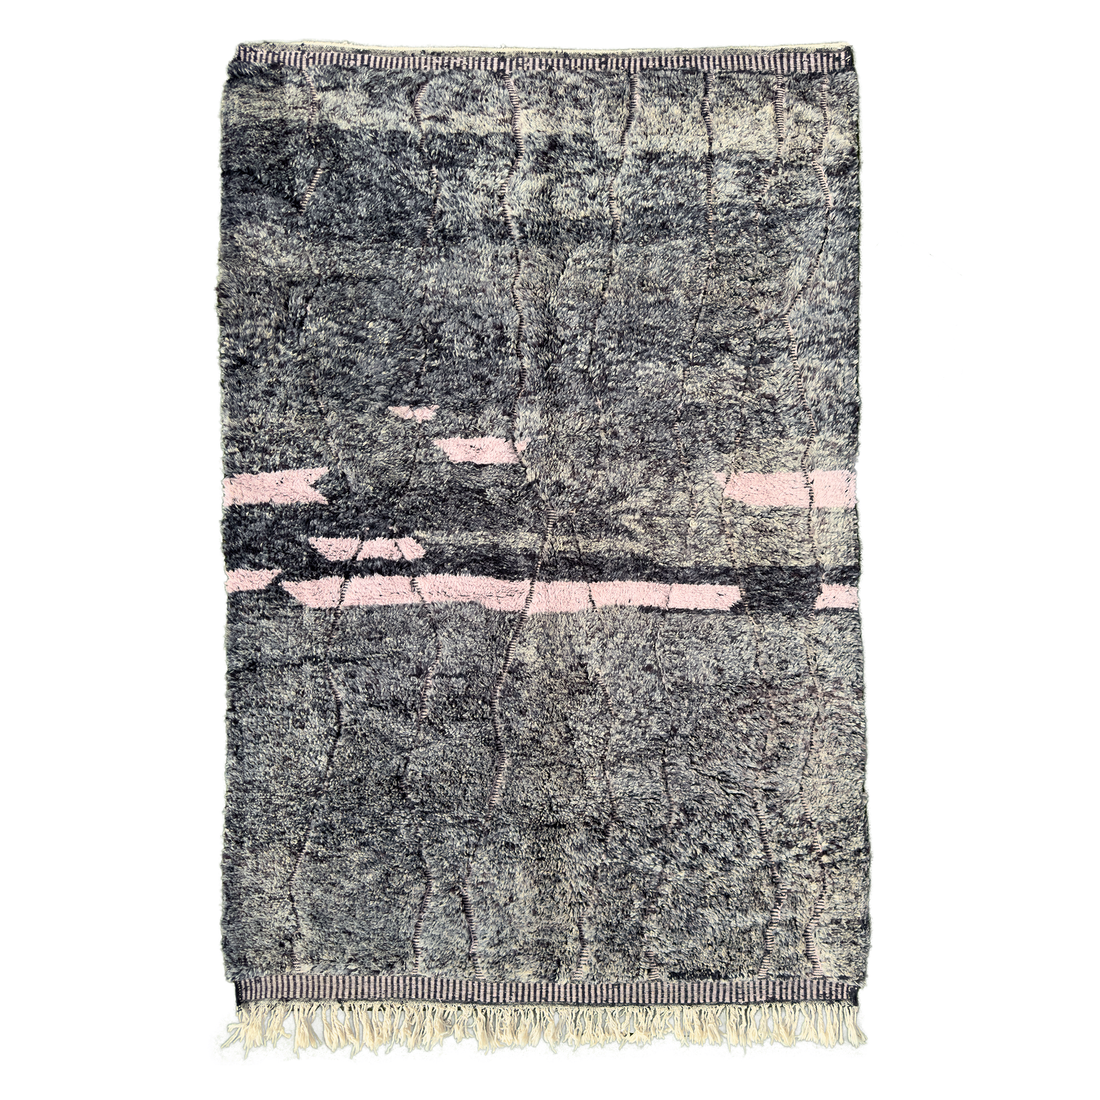 The rug features a unique blend of abrash shades of black and grey, creating a visually striking pattern that can withstand heavy foot traffic areas. The engraved flatweave linework adds a distinctive touch, while the majority of the rug boasts a luxuriously high pile wool at 1.25”.